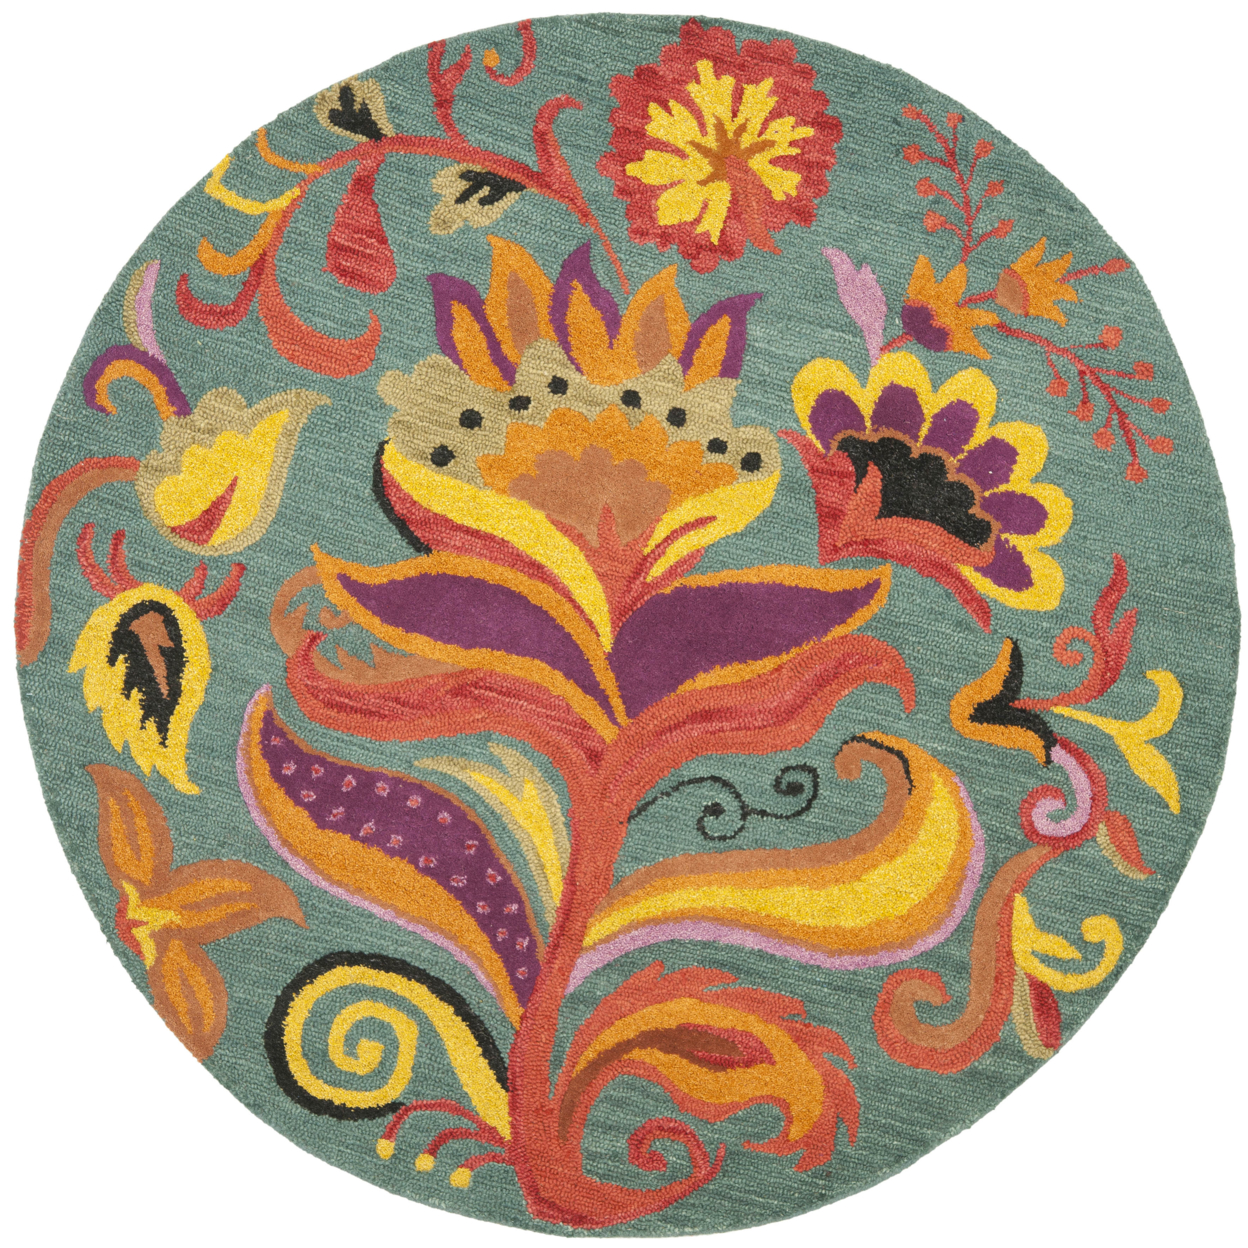 SAFAVIEH Blossom BLM679A Hand-hooked Blue / Multi Rug - 6' Round